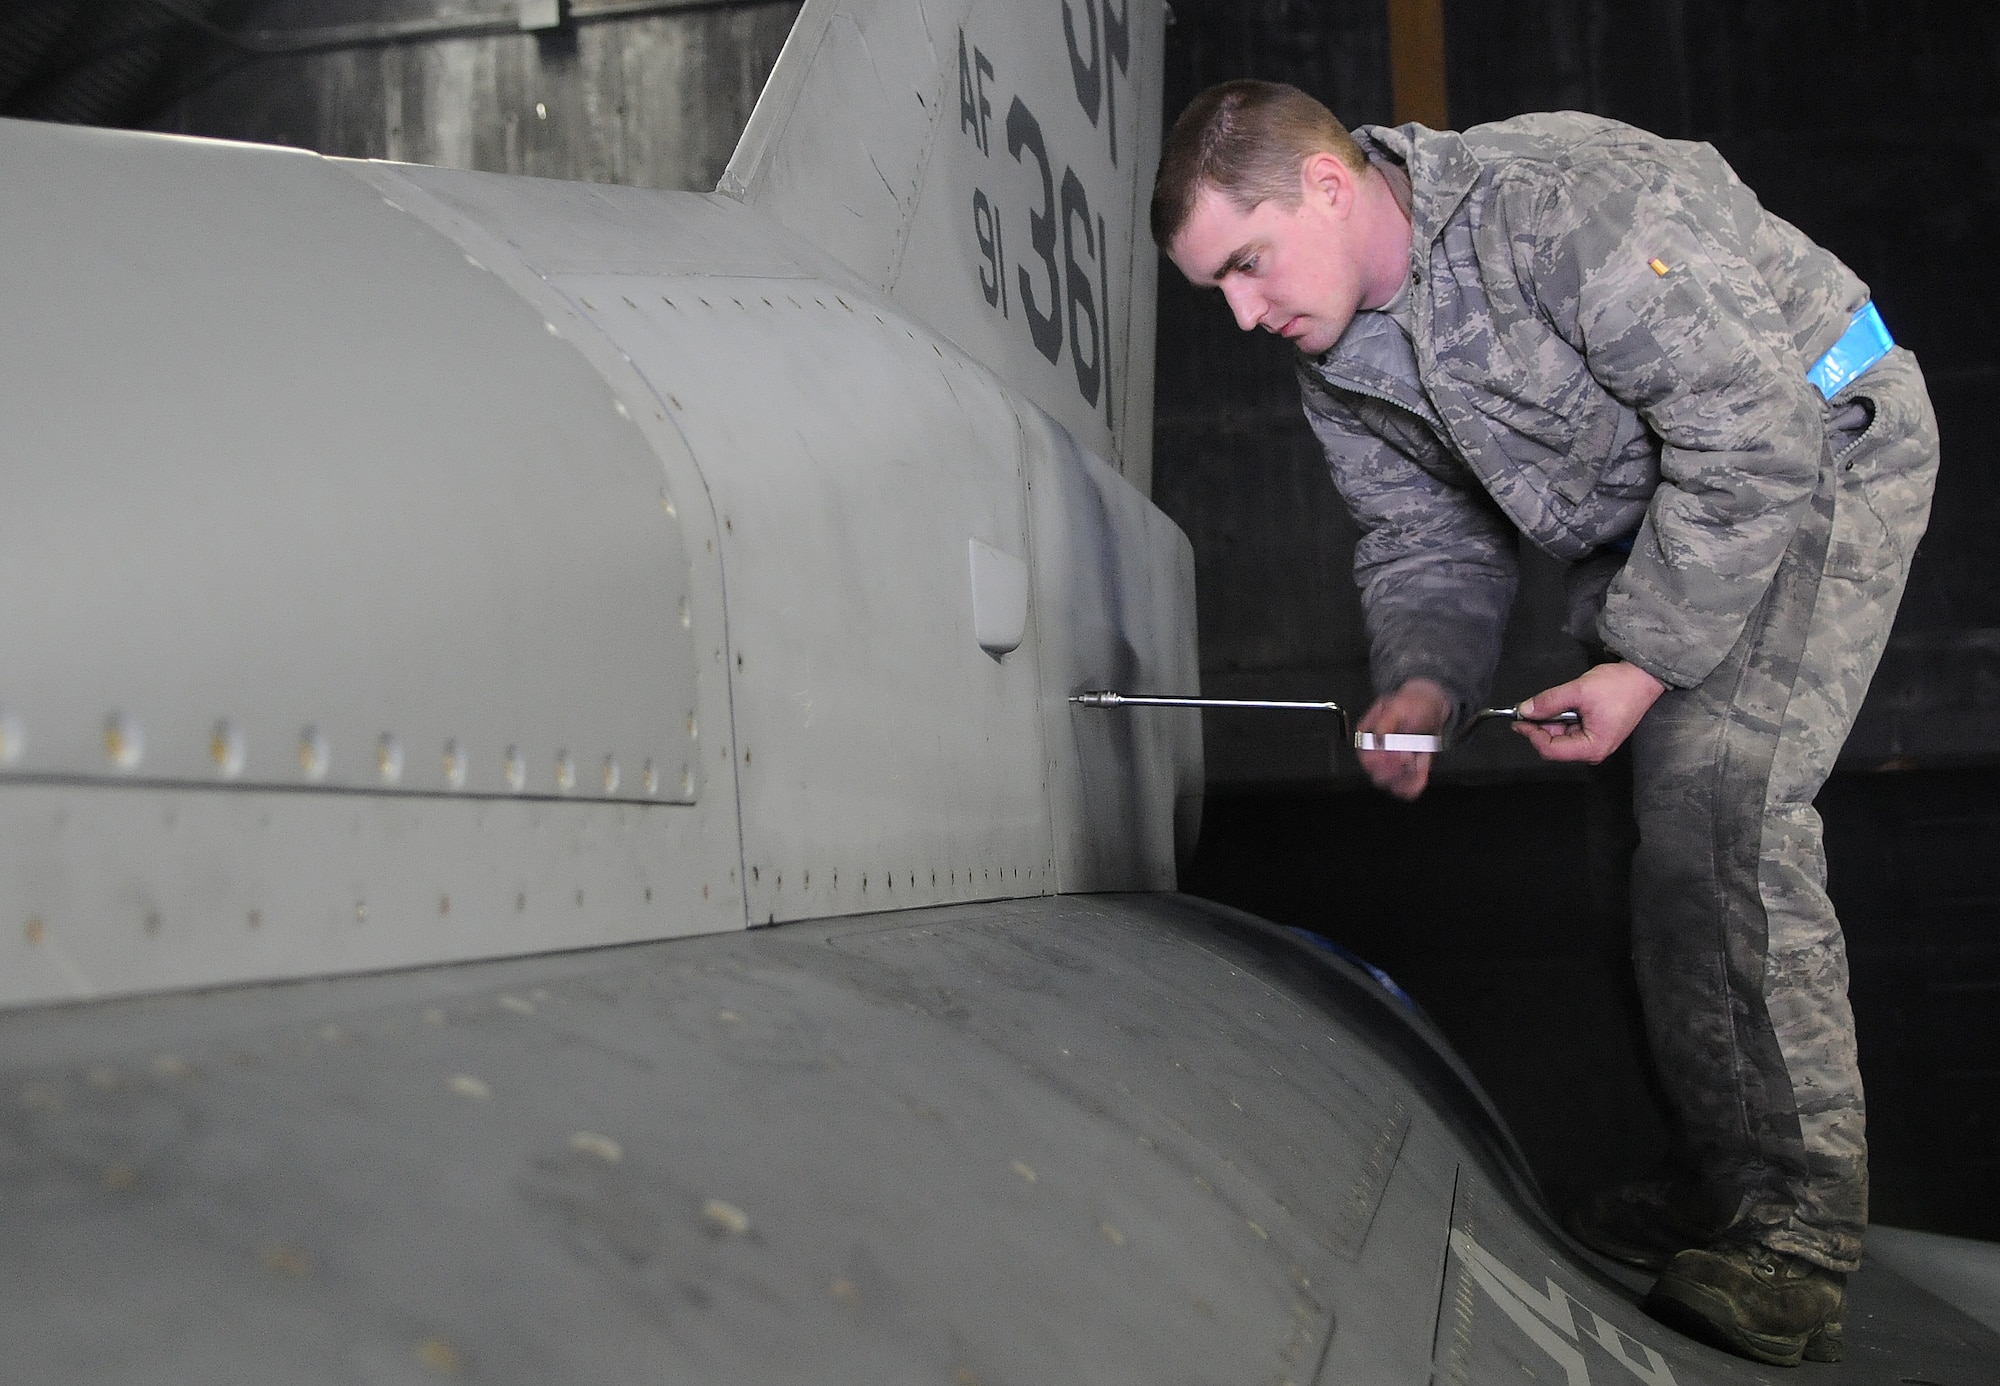 SPANGDAHLEM AIR BASE, Germany – Staff Sgt. Ryan Merrill, 480th Aircraft Maintenance Unit dedicated crew chief, uses a speed handle to open the panel of an F-16 Fighting Falcon during a “cannibalization bird” process Dec. 30. The cann-bird process is a maintenance process in which one aircraft is taken apart to supply mission capable parts that will be used by remaining aircraft in the fleet. (U.S. Air Force photo/Senior Airman Nick Wilson)